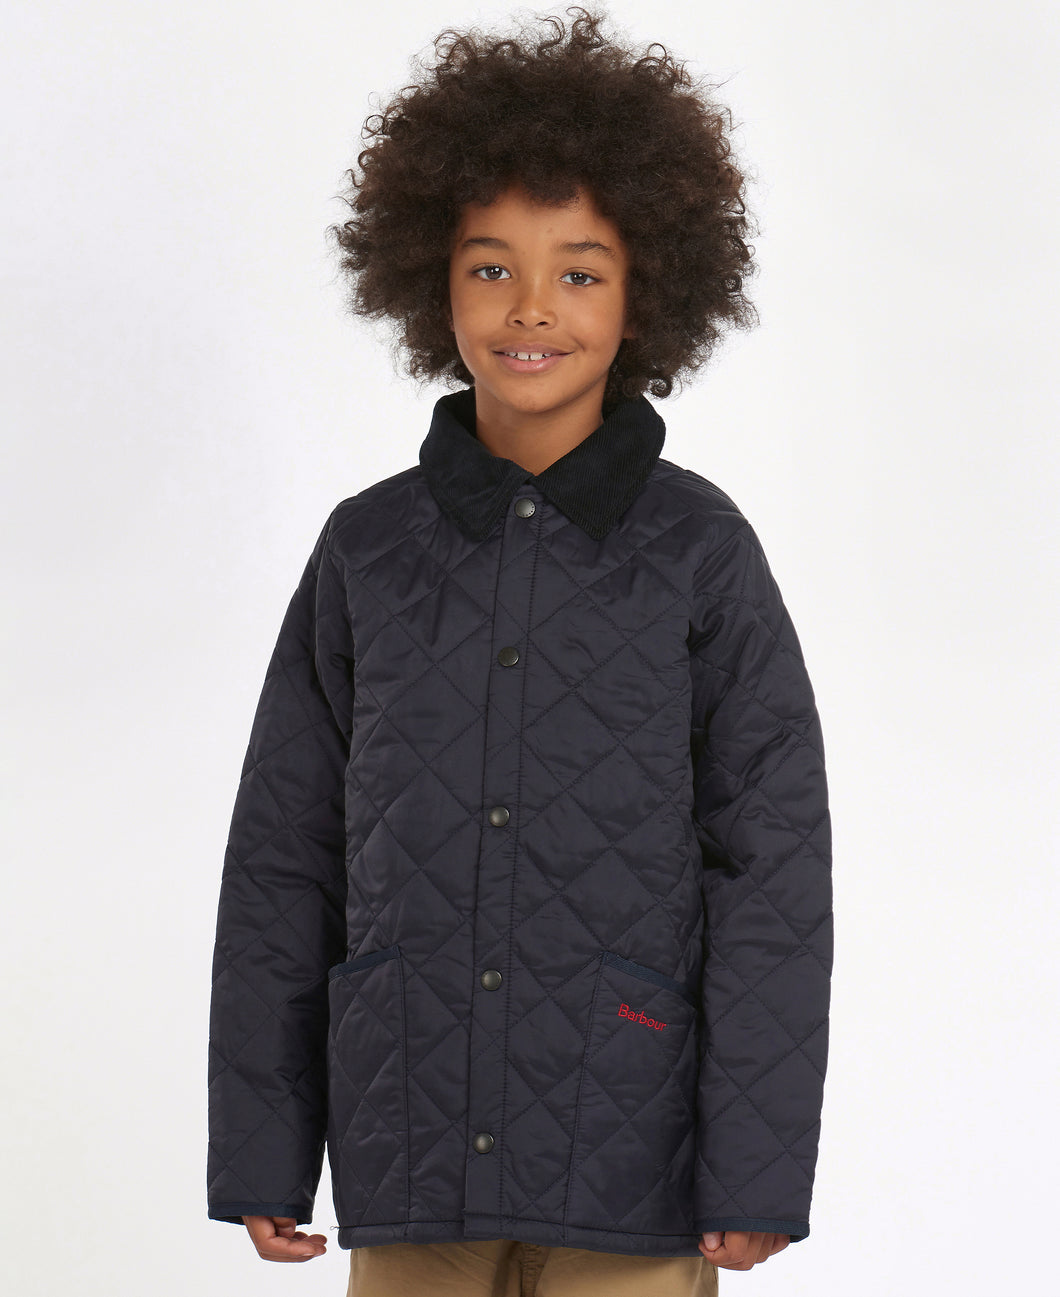 Model wearing Barbour Youth Liddesdale Quilt in Navy.